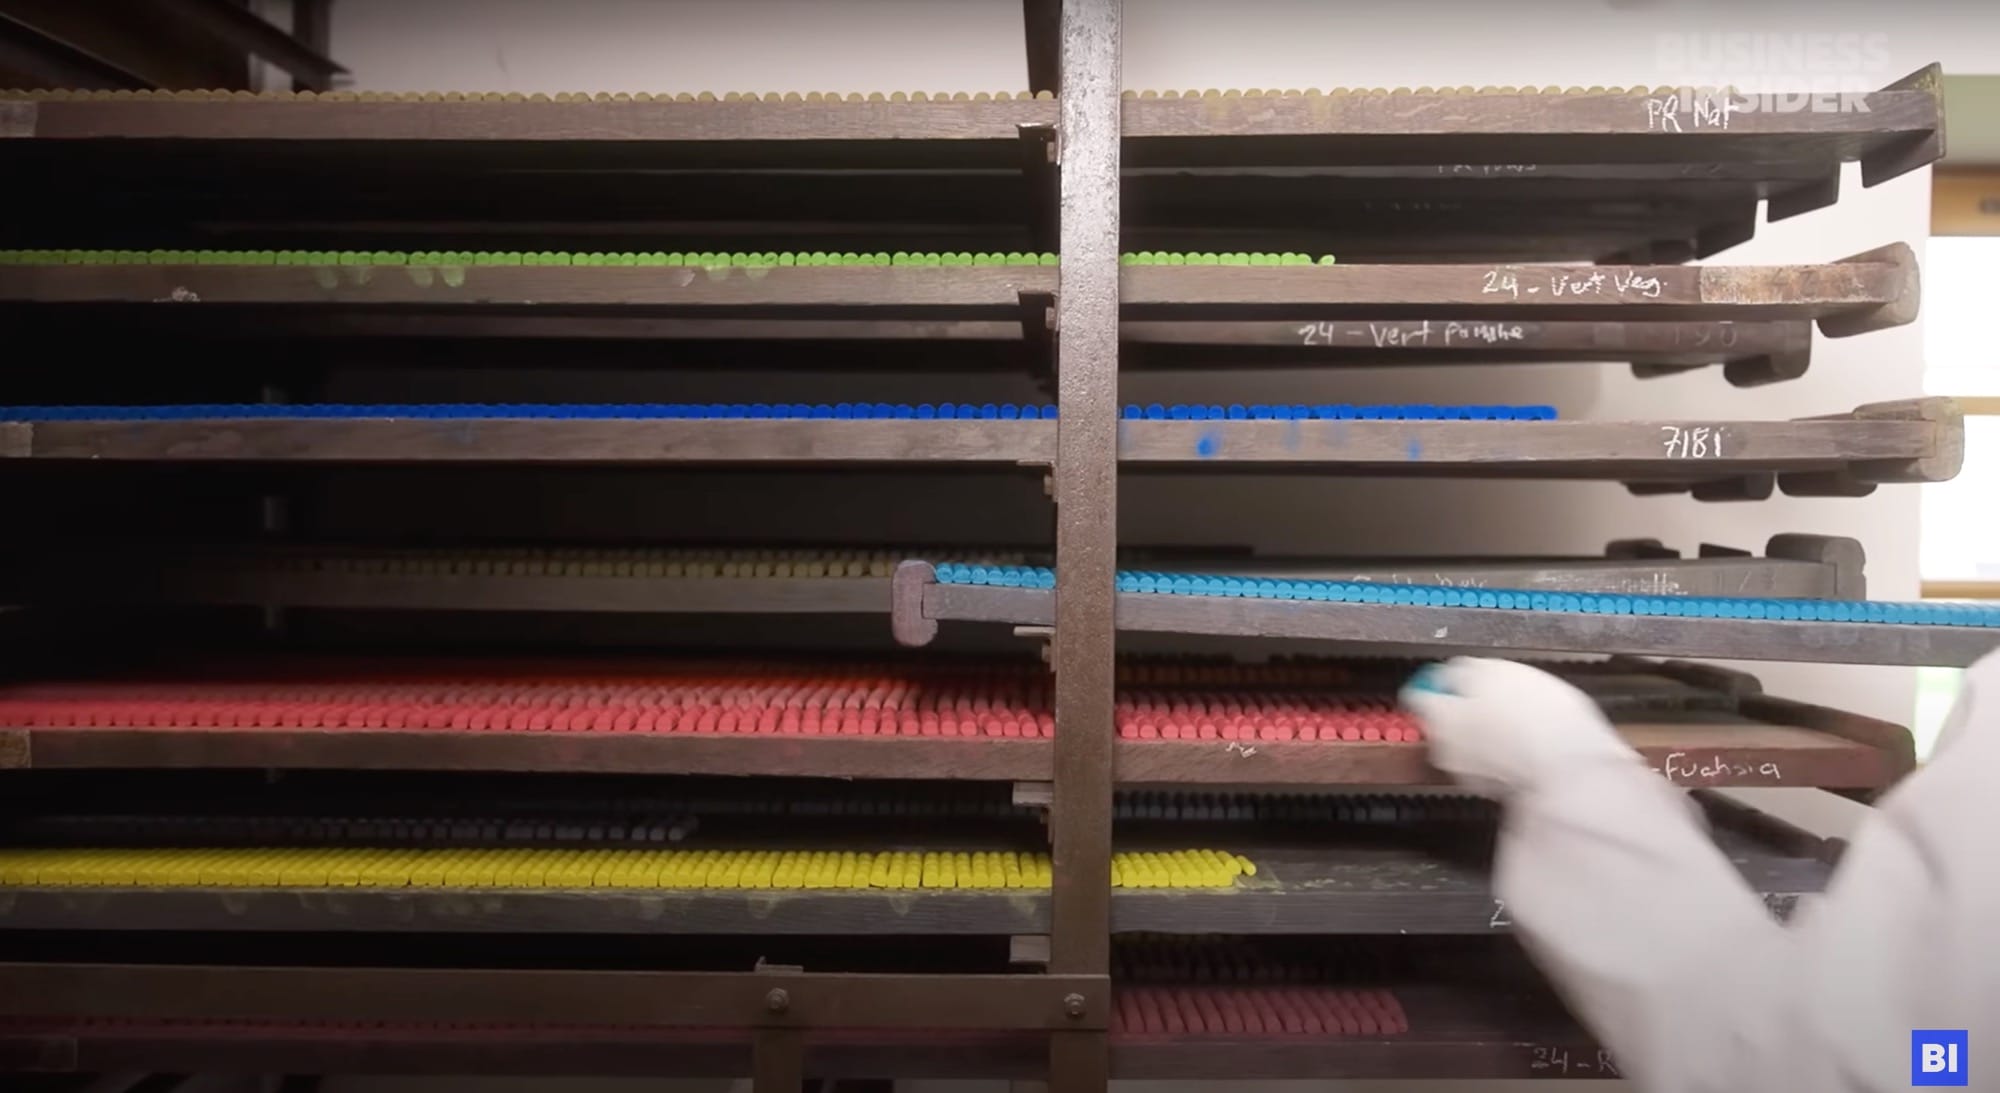 a still from a short documentary about a pastel maker in France, showing a trays of pastels being loaded onto a shelving unit to cure or dry